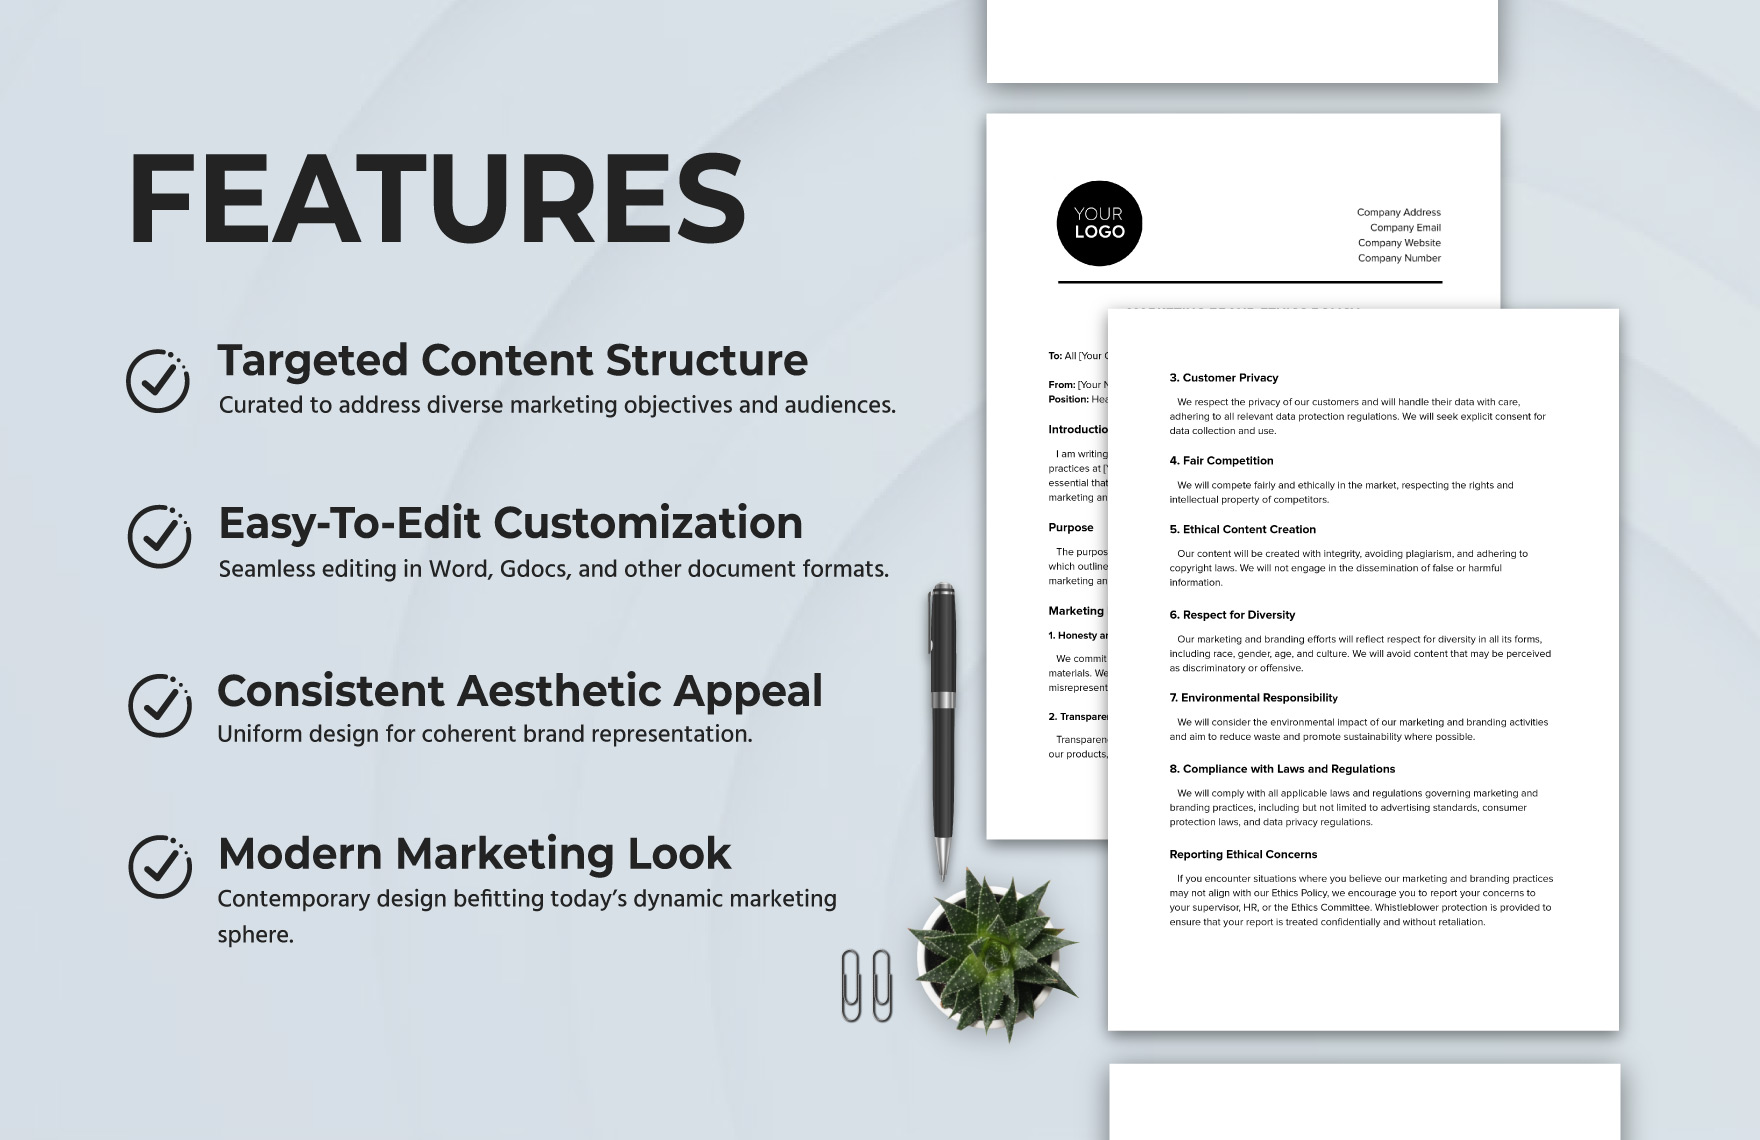 Marketing Branding Ethics Policy Template